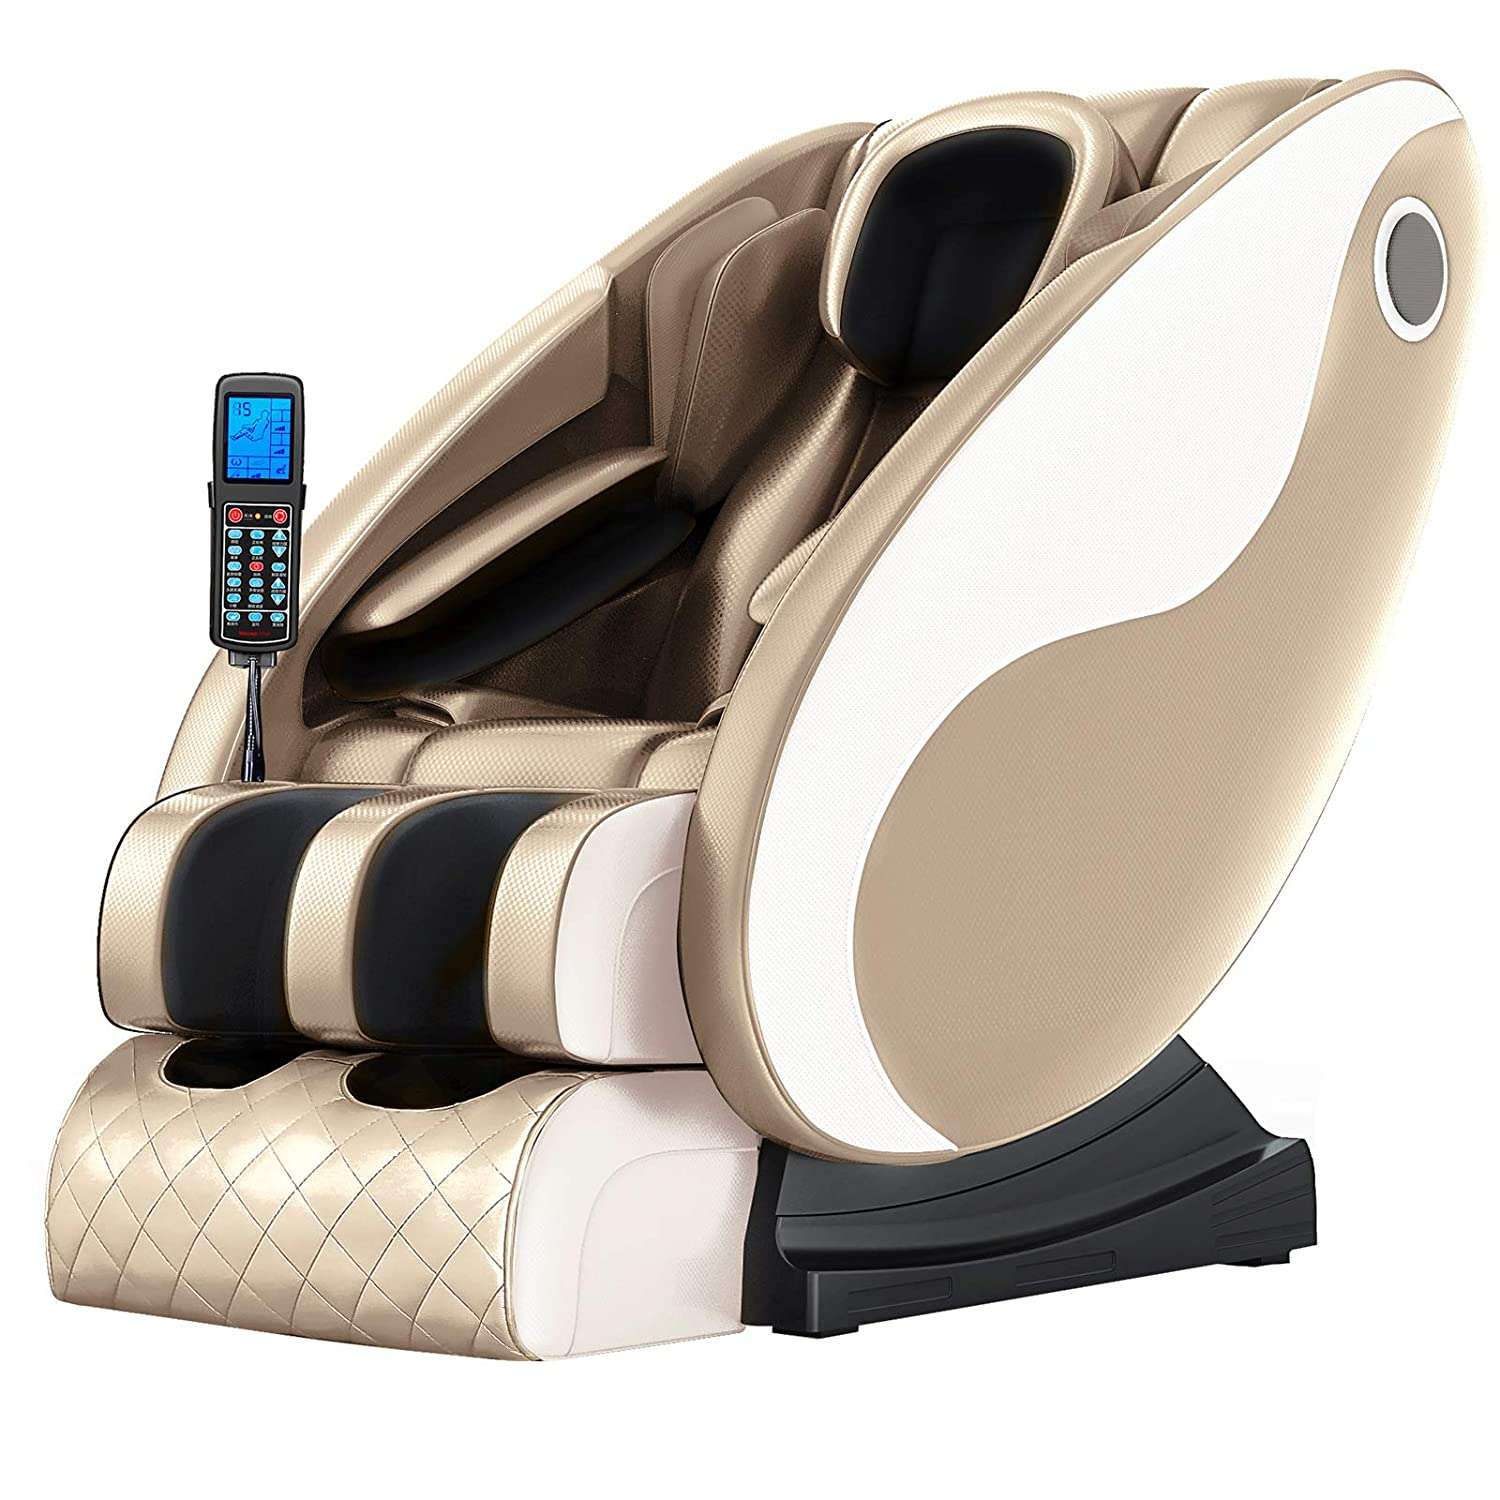 MB Series Massage Chairs Reviews 2021